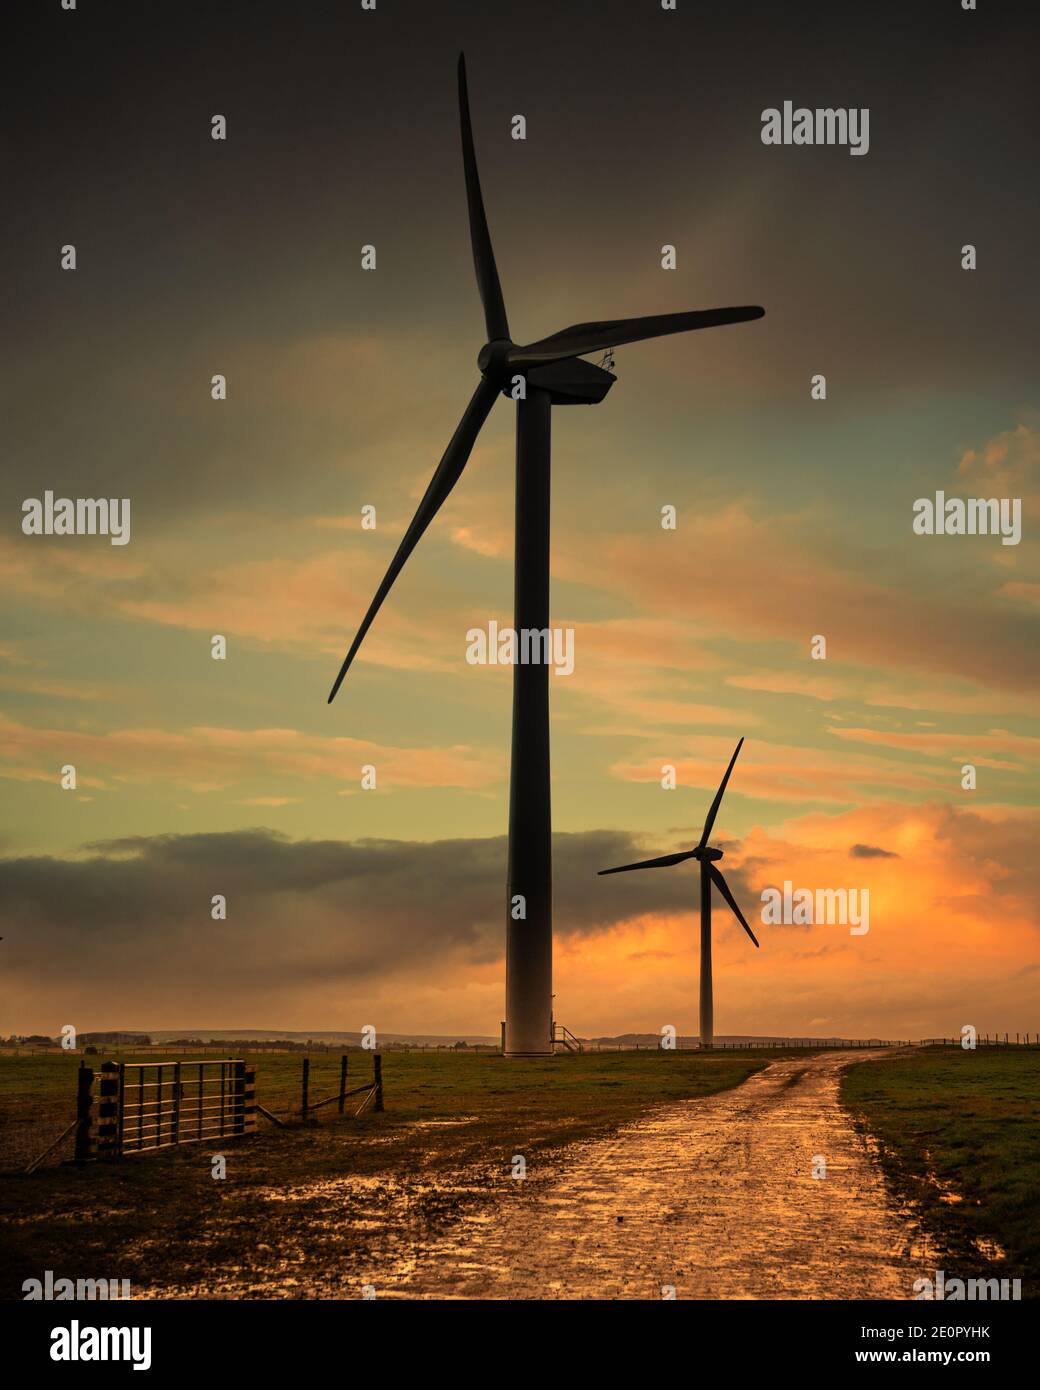 Wind Farm at Sunset, Clean Energy Stock Photo